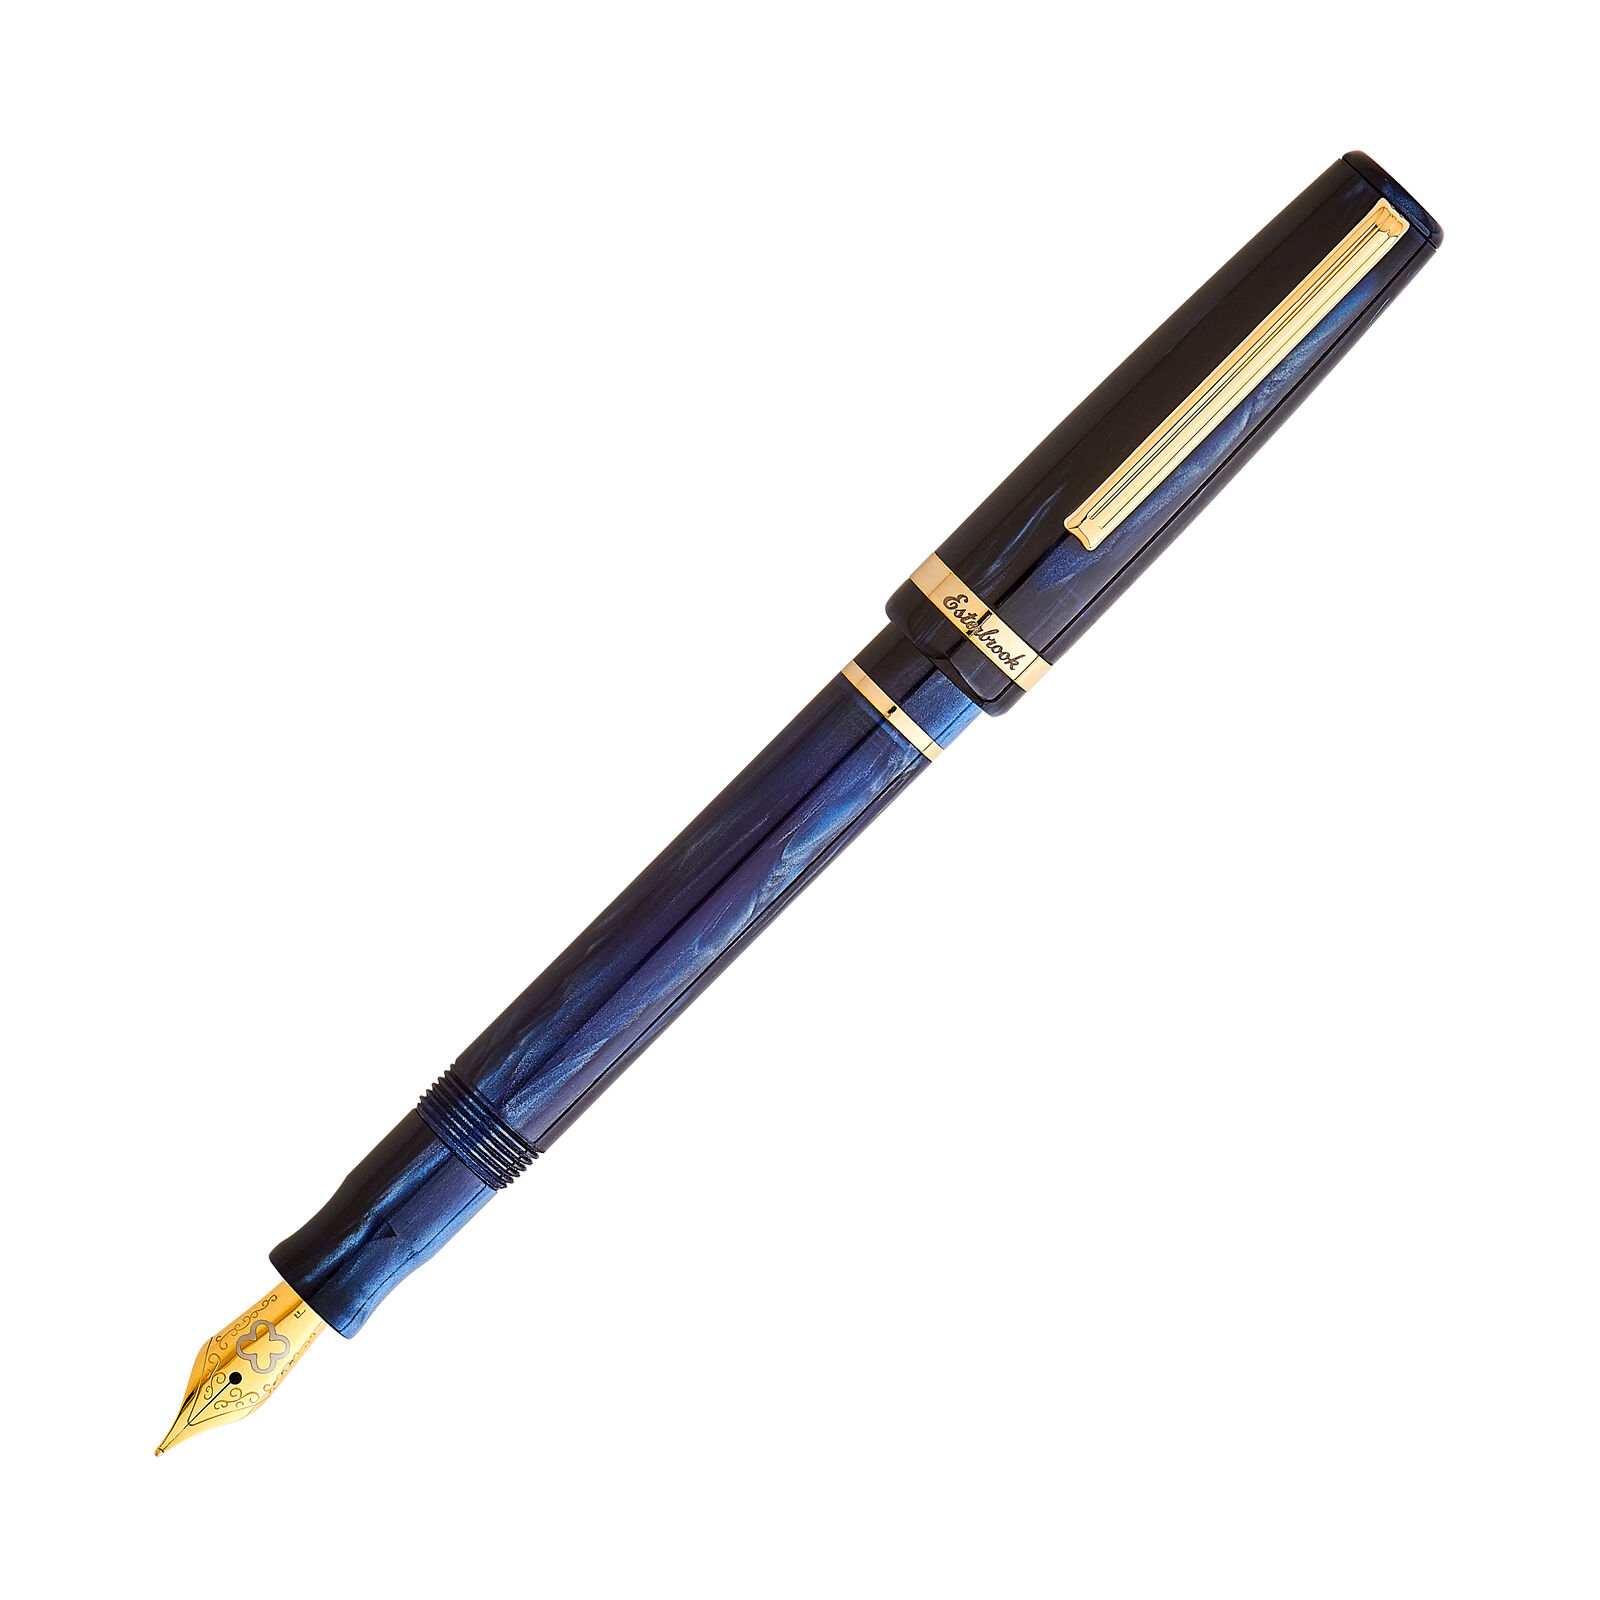 Esterbrook JR Pocket Fountain Pen in Capri Blue with Gold Trim - Broad Point